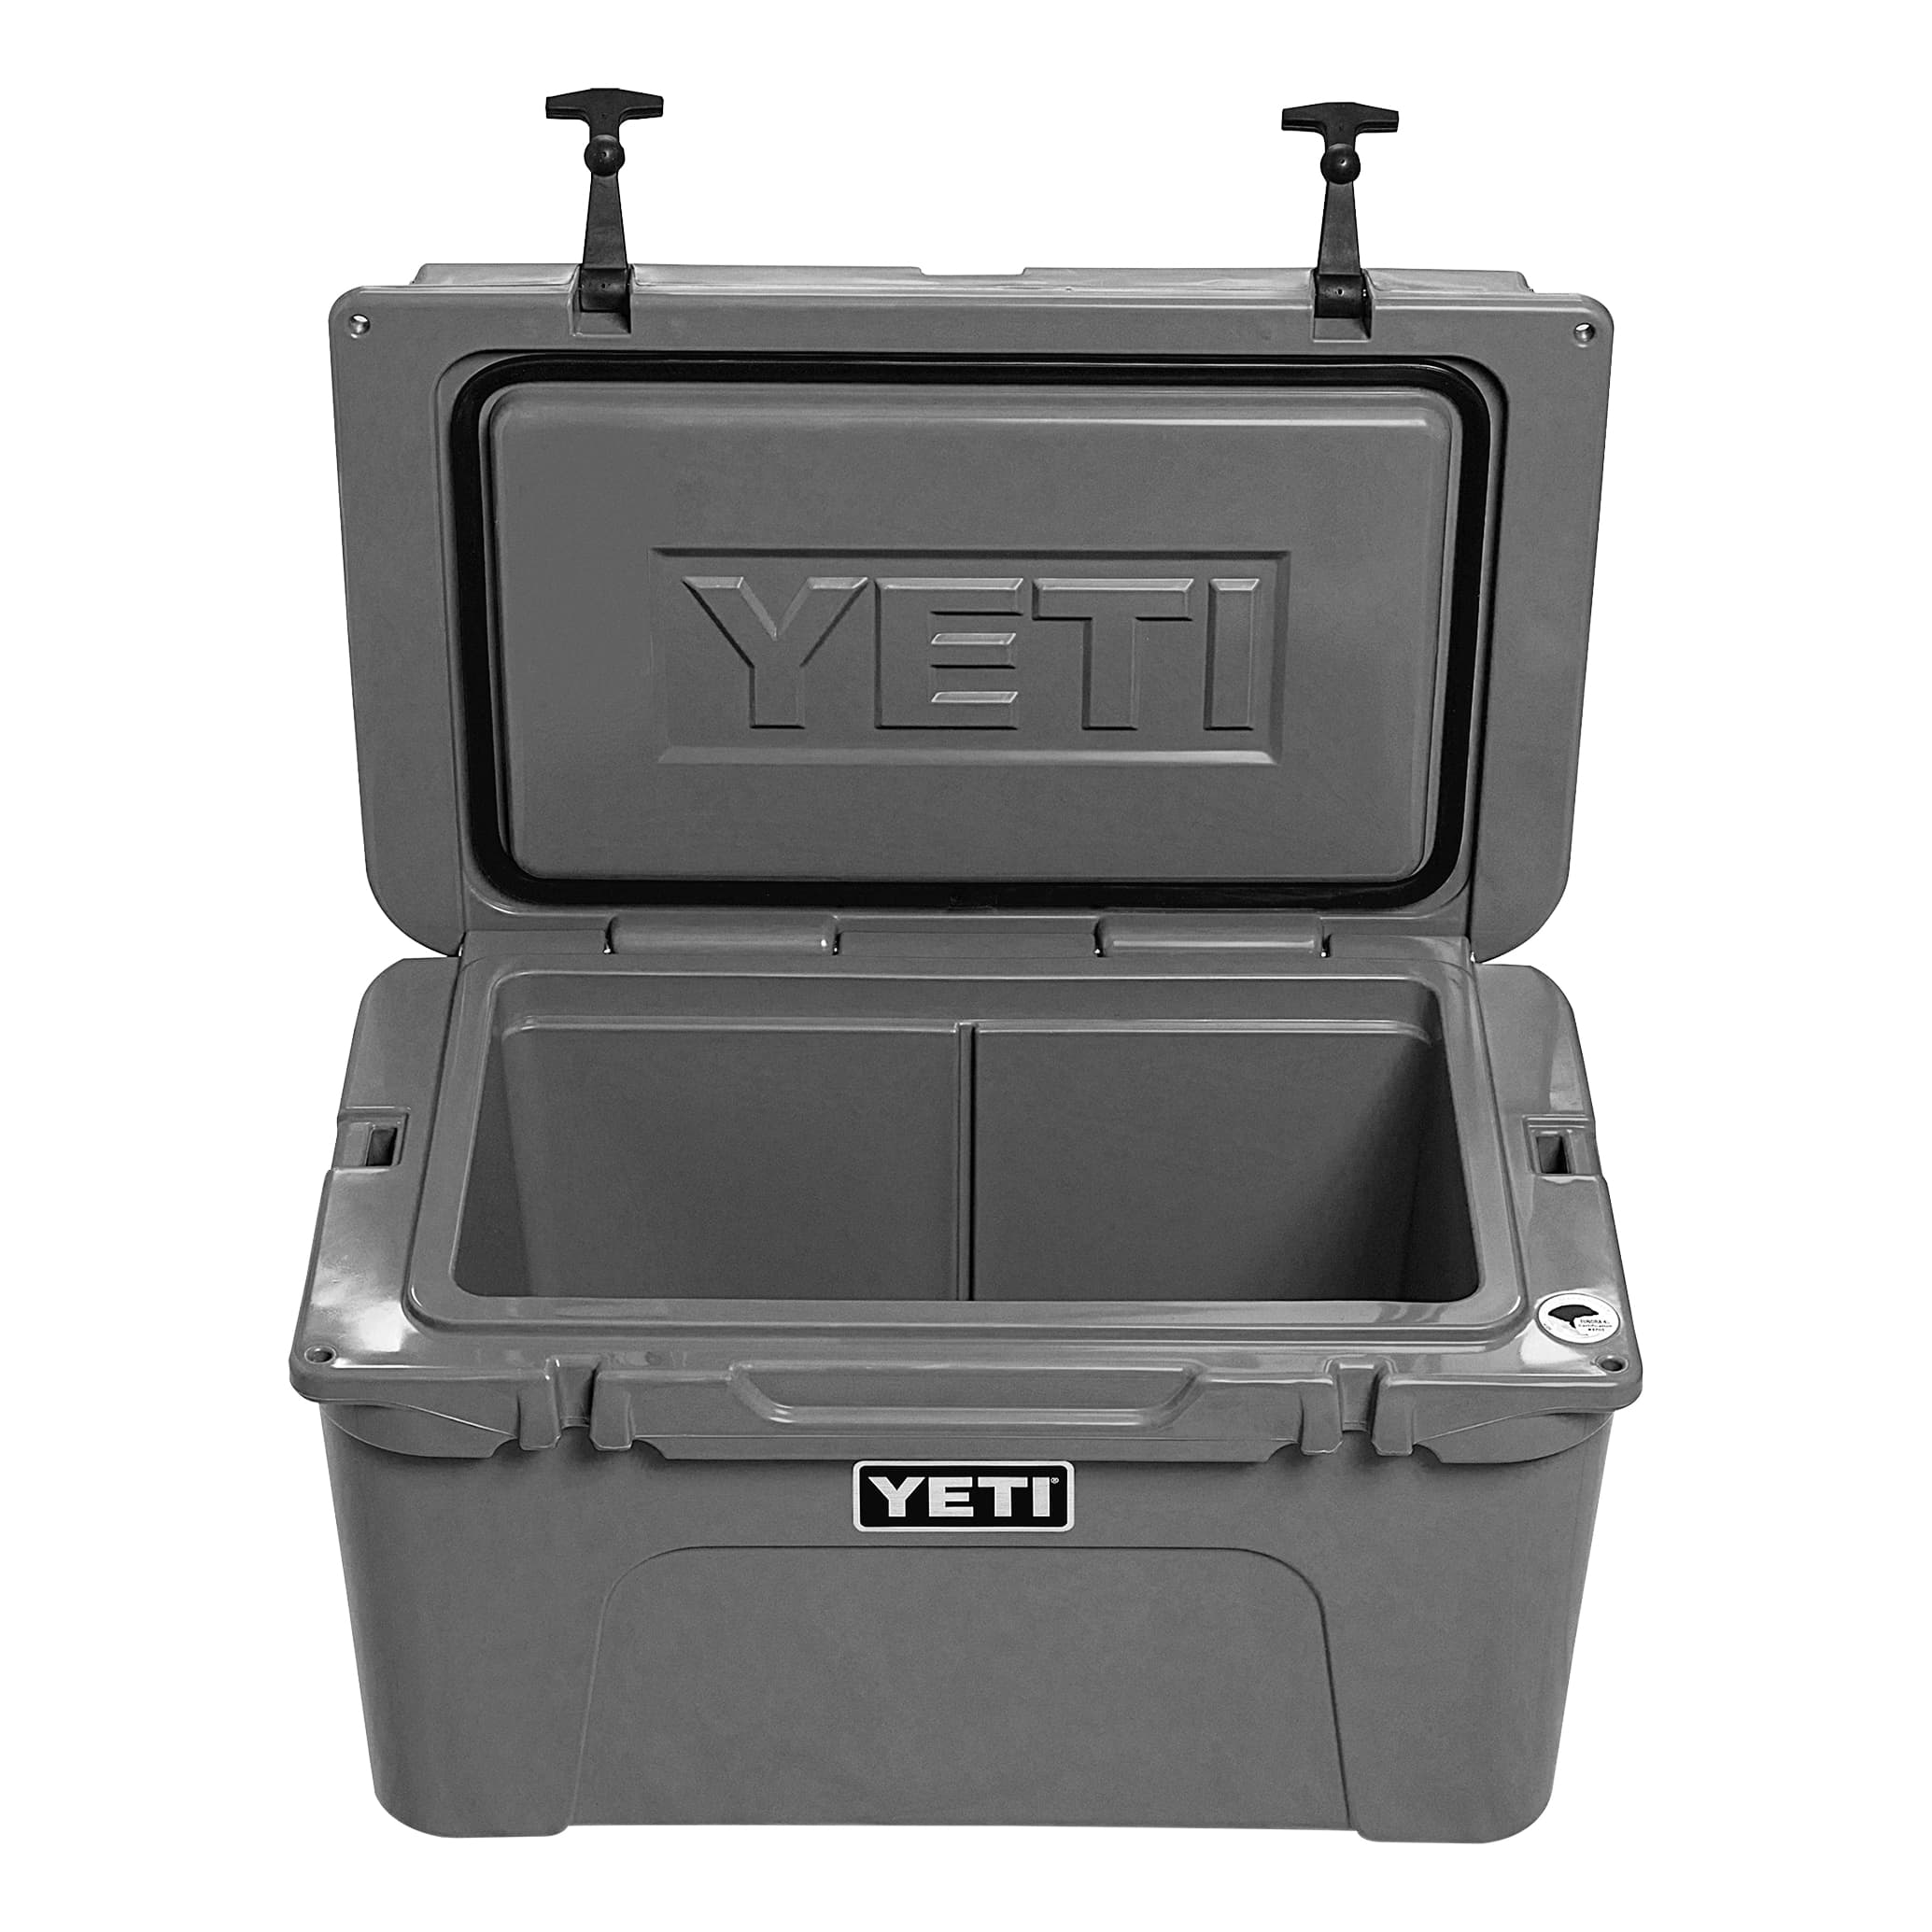 Yeti Coolers Tundra 45 Series Cooler - Charcoal - Open View